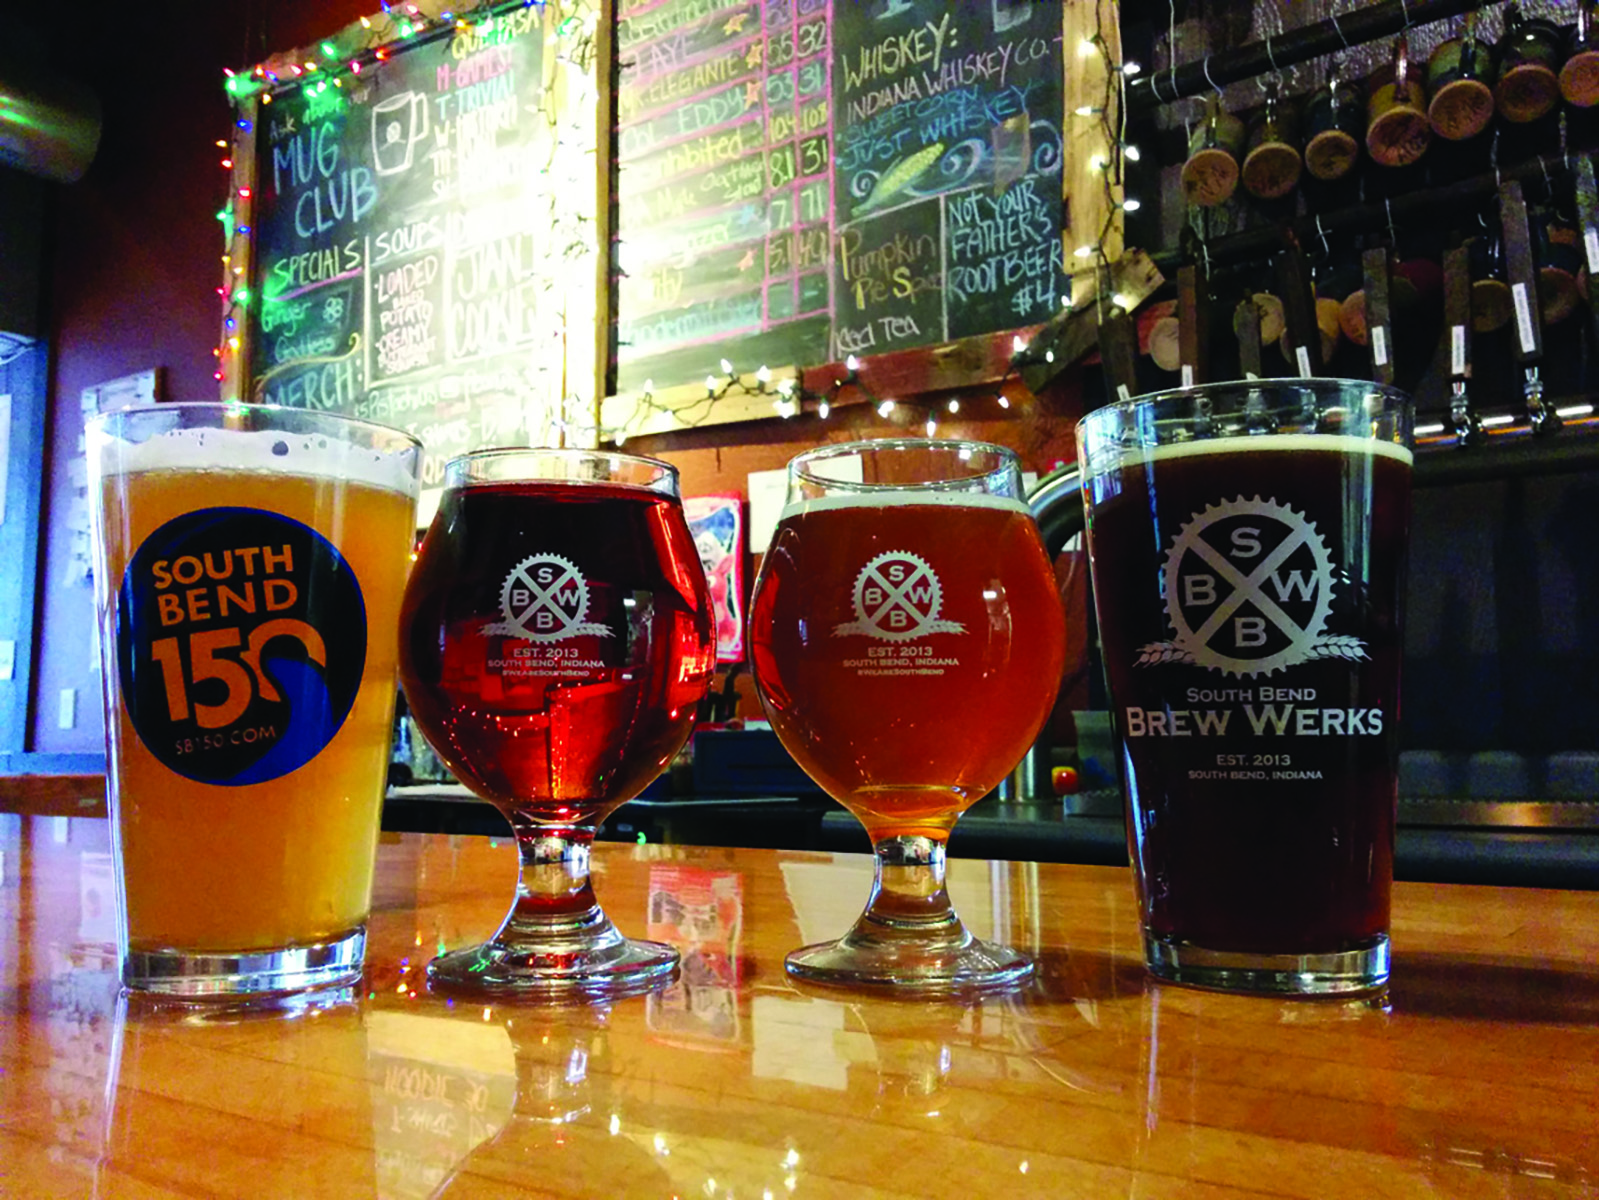 South Bend Brew Werks is a standout among Indiana breweries